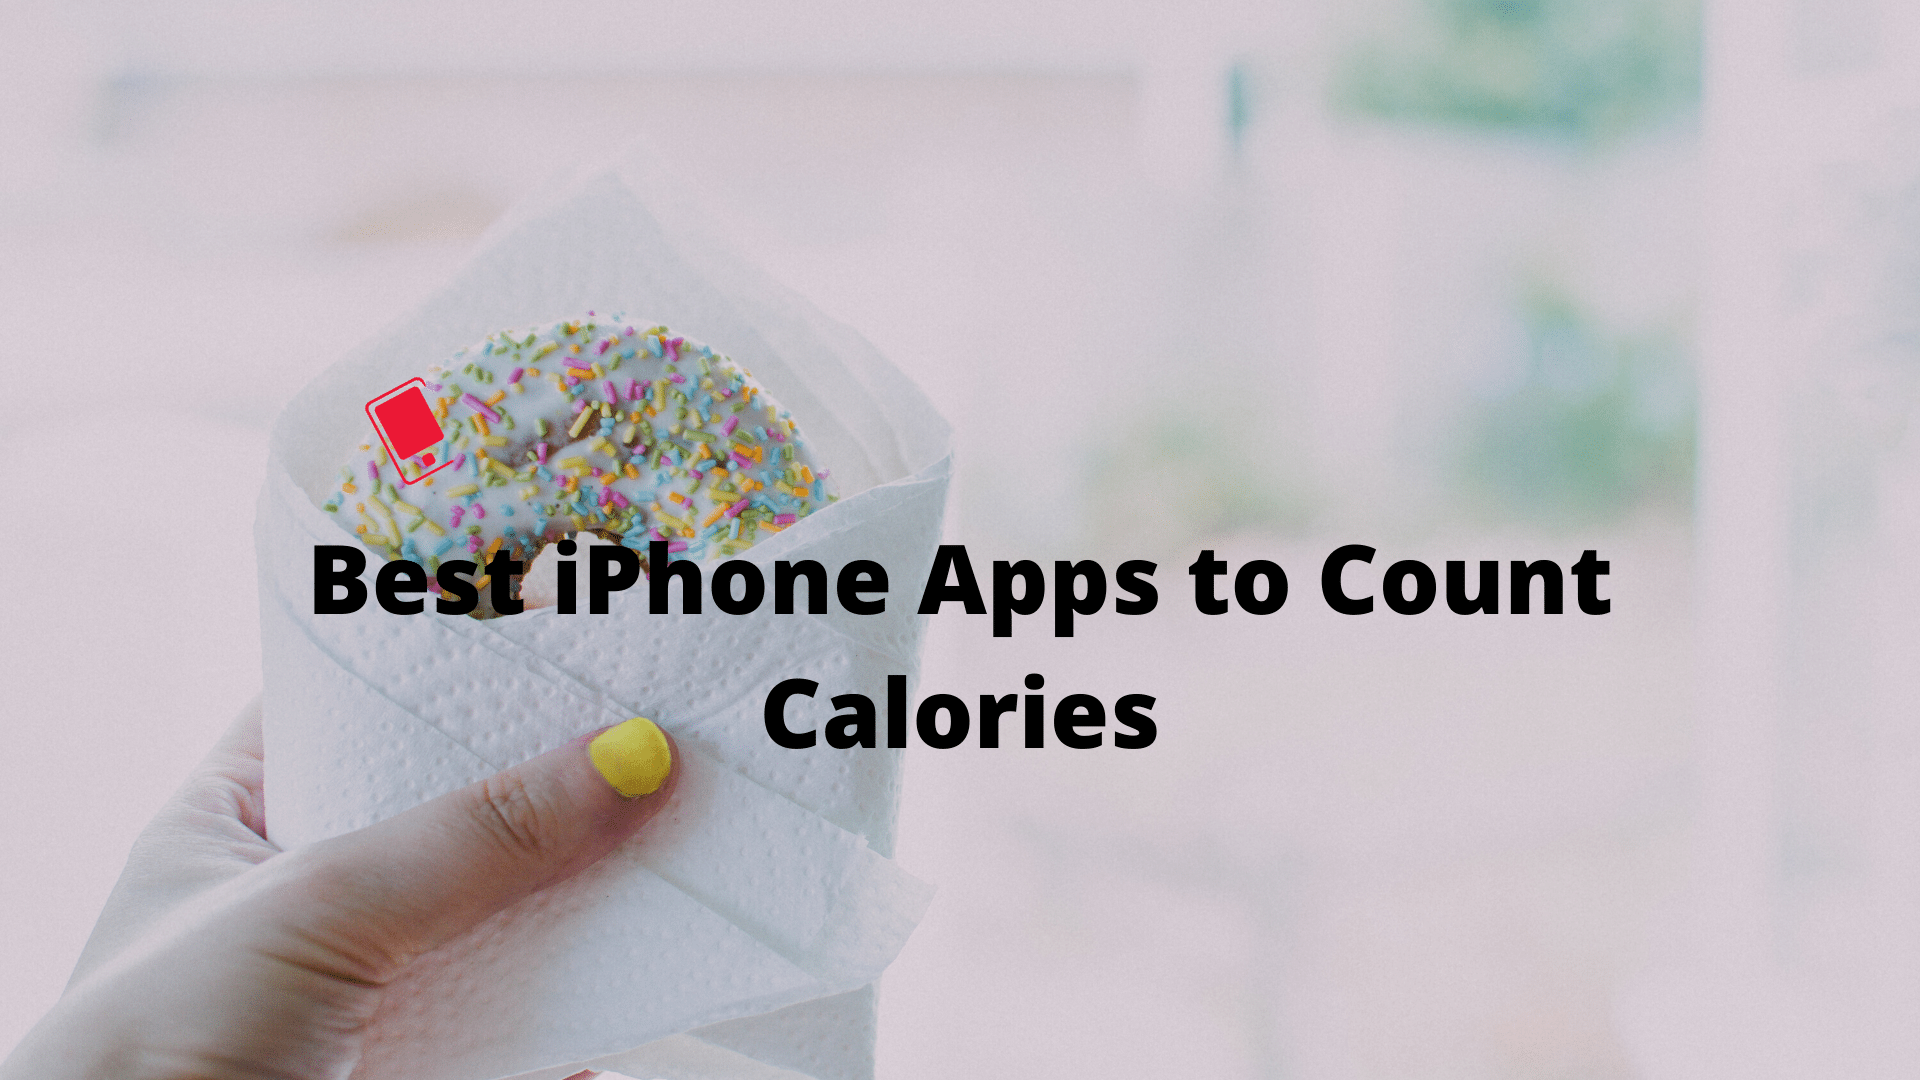 Best Calorie Counter iPhone apps